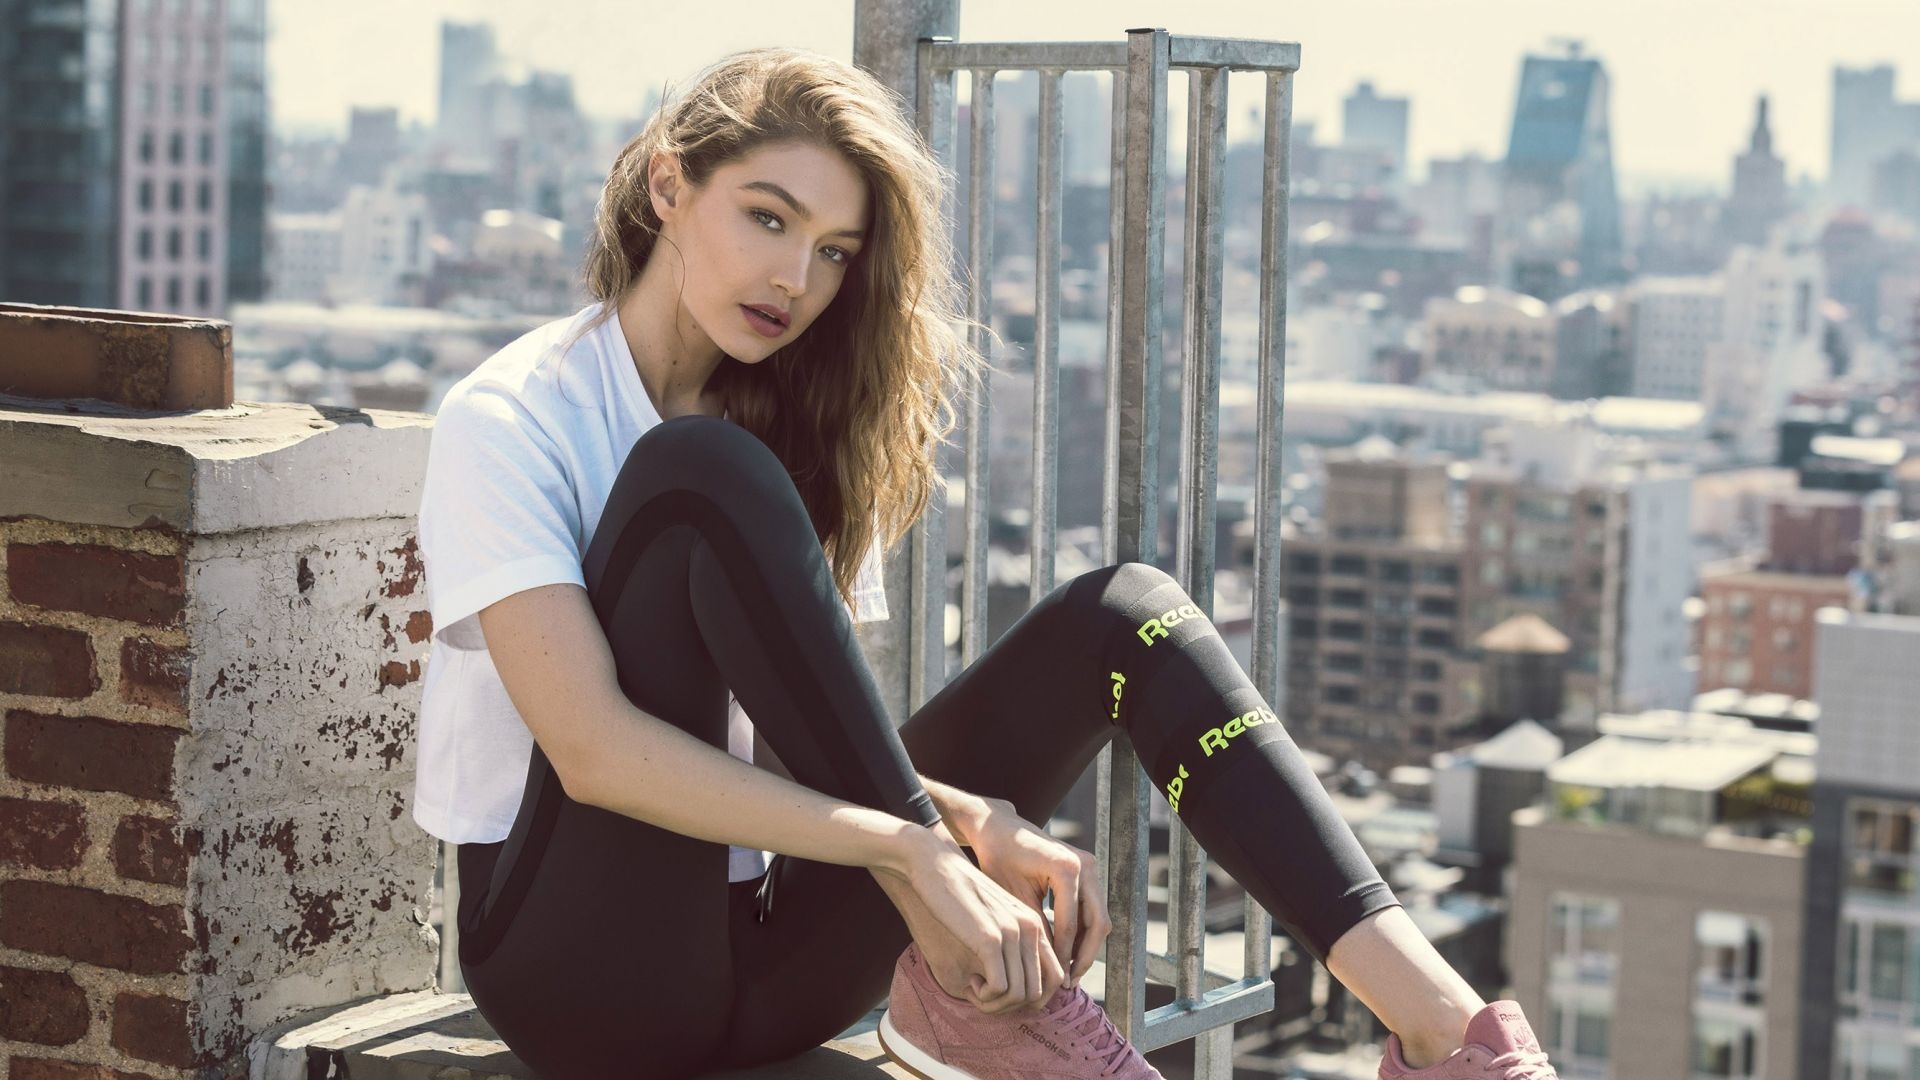 Reebok: Gigi Hadid, A model-sportswear collaboration, A new co-designed capsule collection. 1920x1080 Full HD Background.